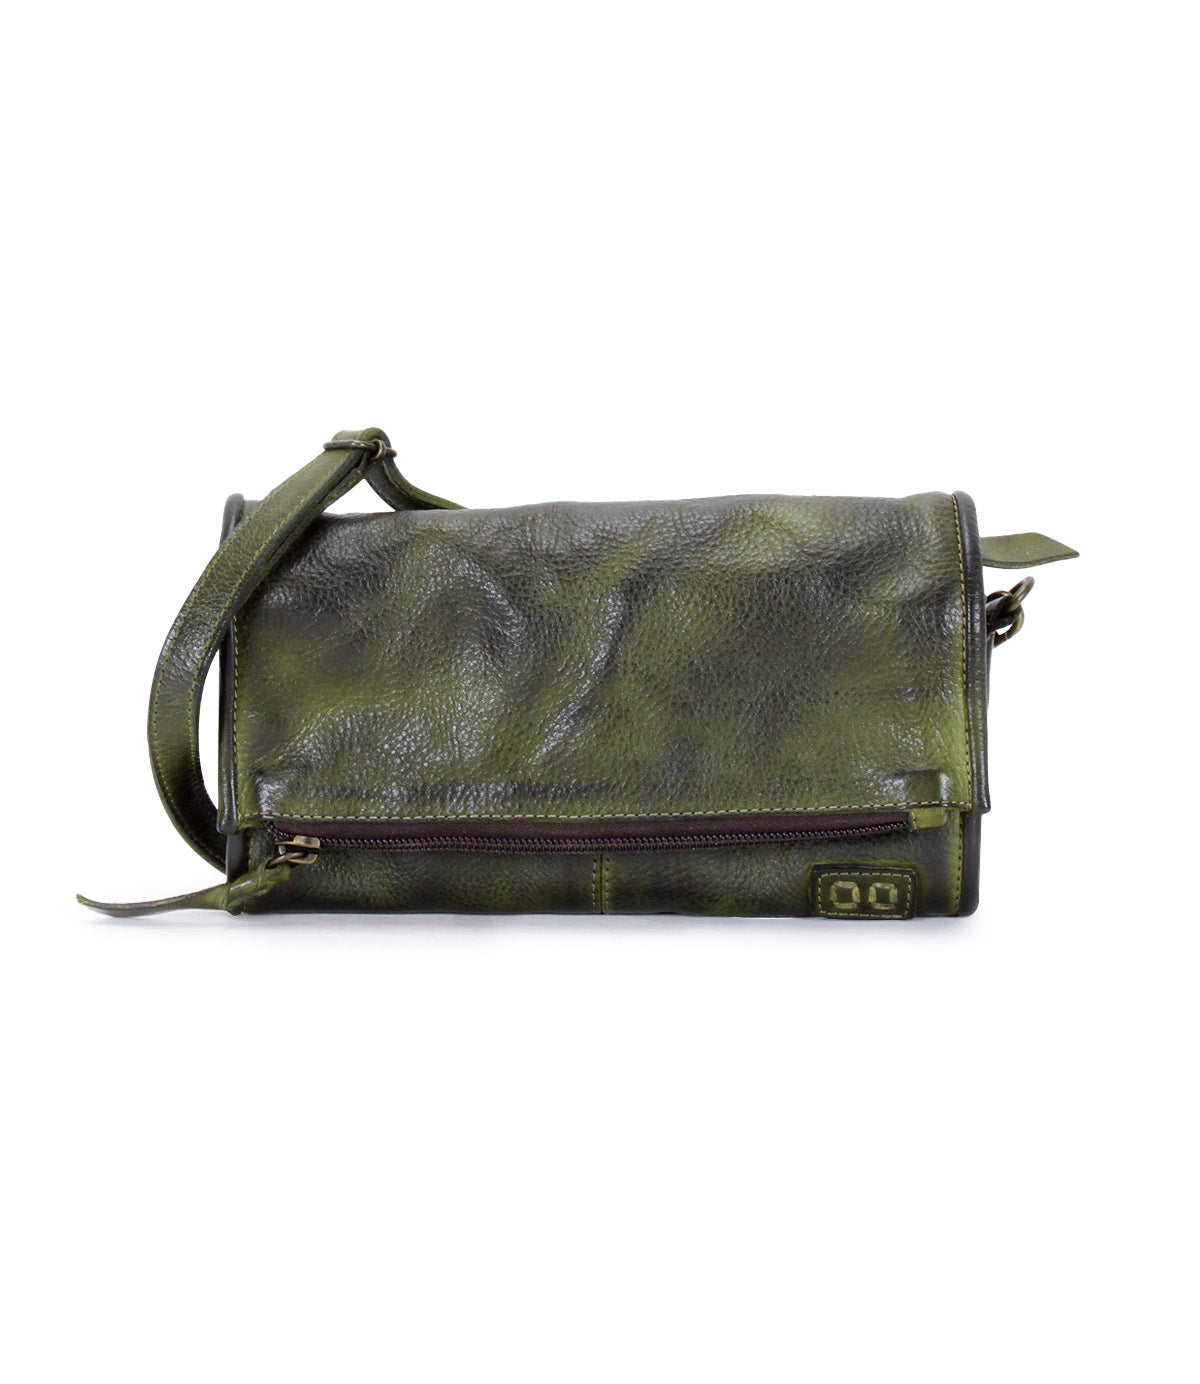 An Amina by Bed Stu, a green leather cross body bag with a zipper.